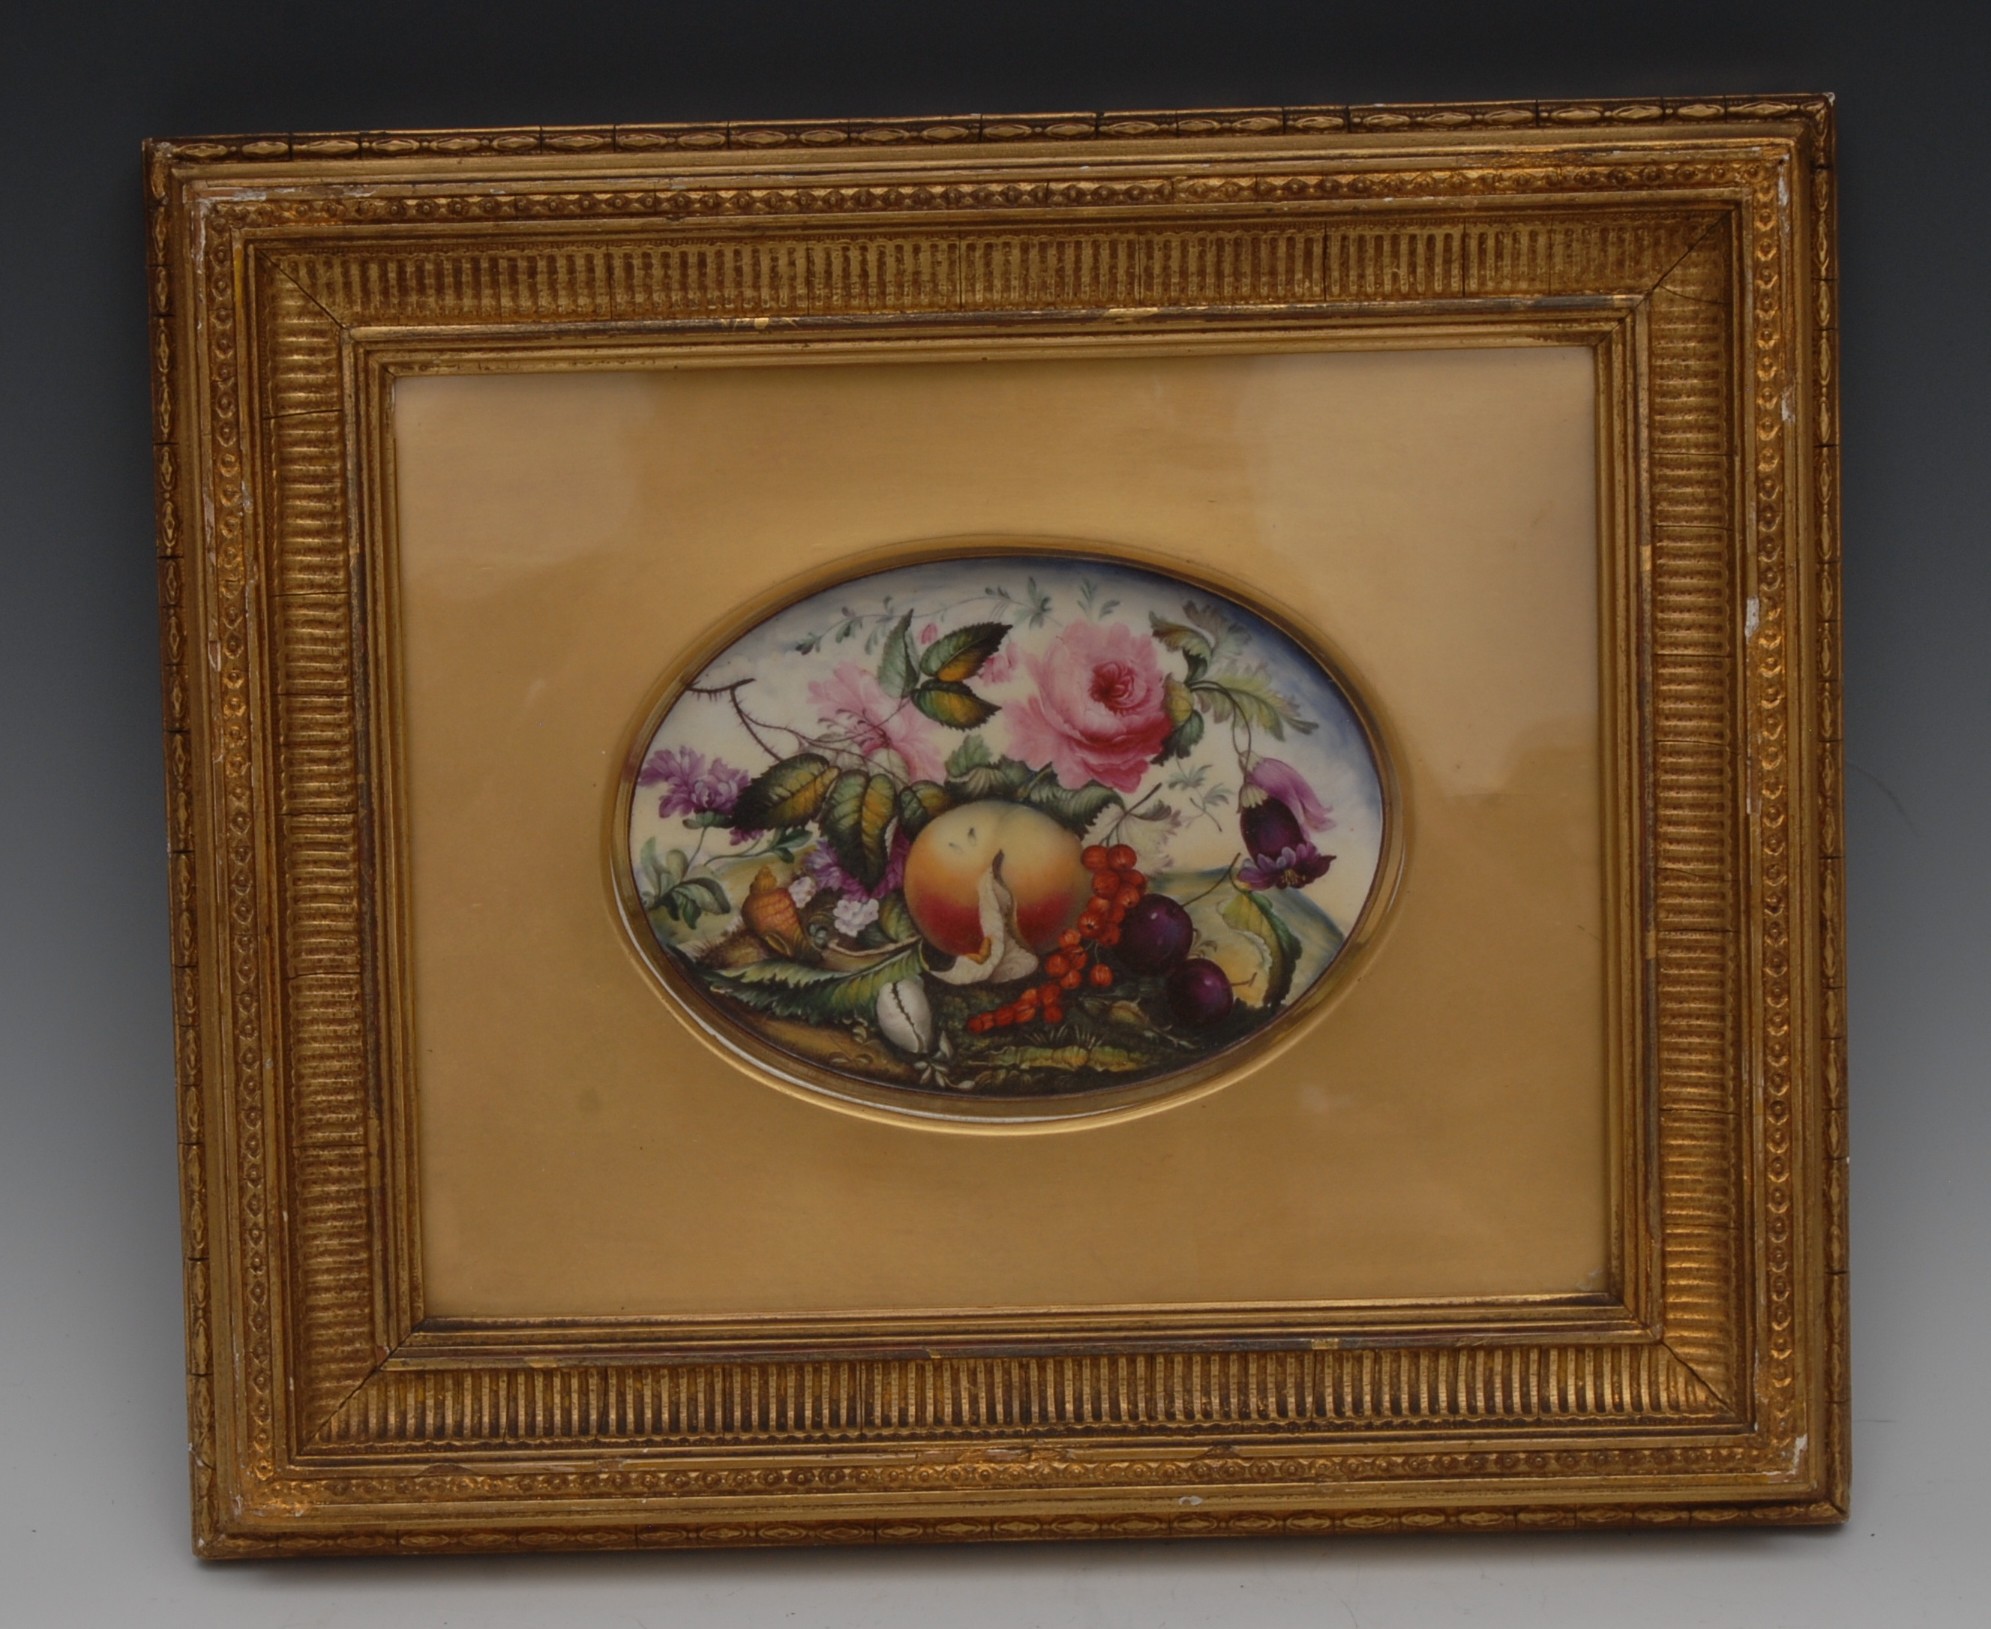 An English Porcelain oval plaque, well painted with peaches, peonies, berries, shells and foliage, - Image 2 of 2